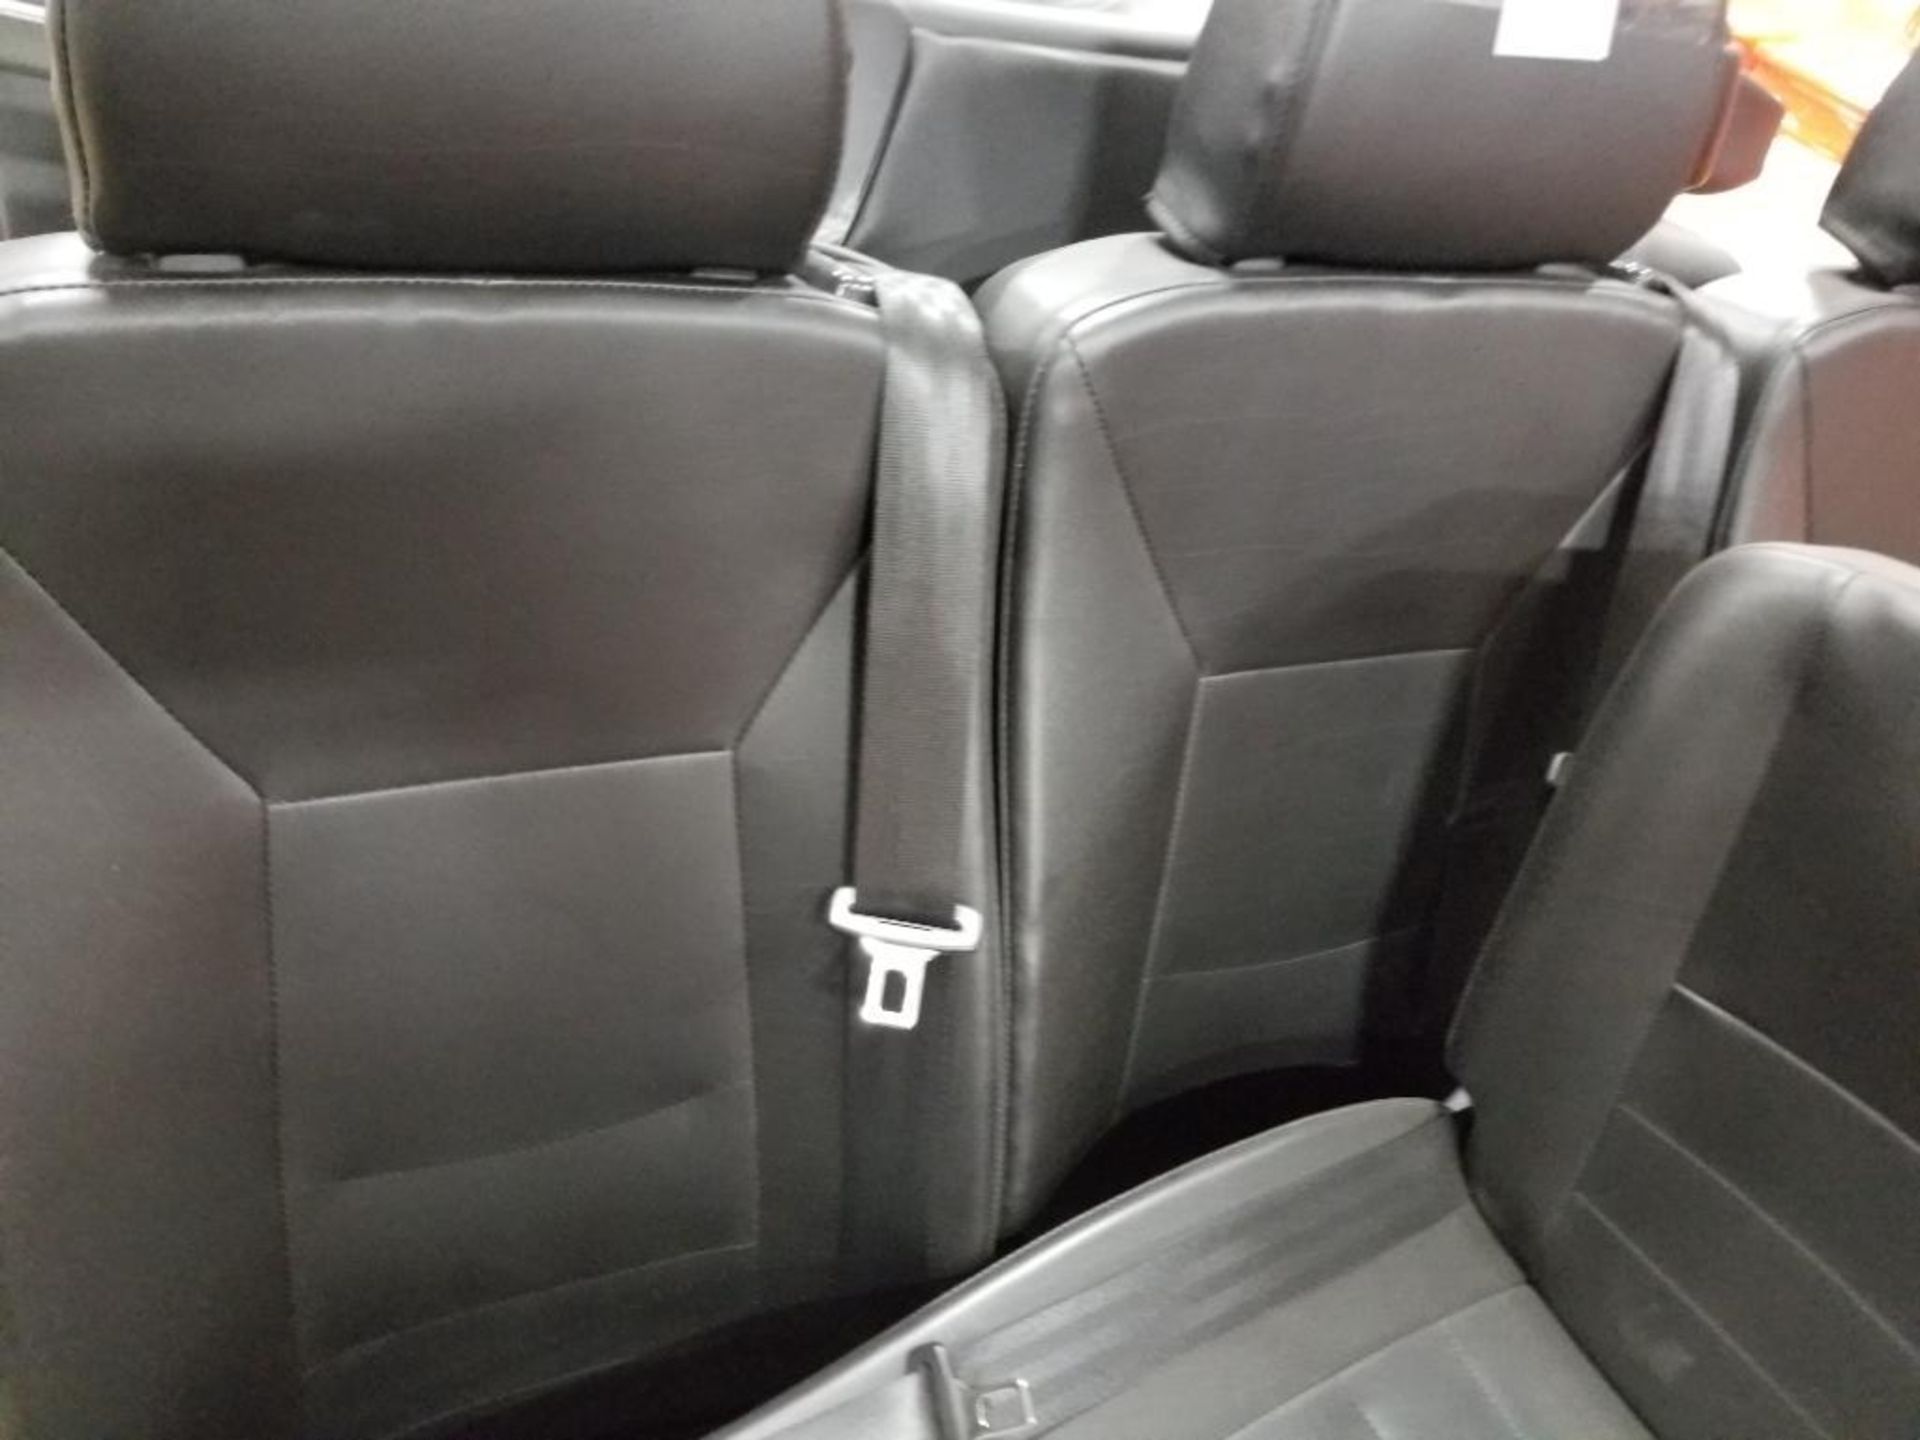 Qty 4 - Smart Floor Seating row seats. - Image 7 of 11